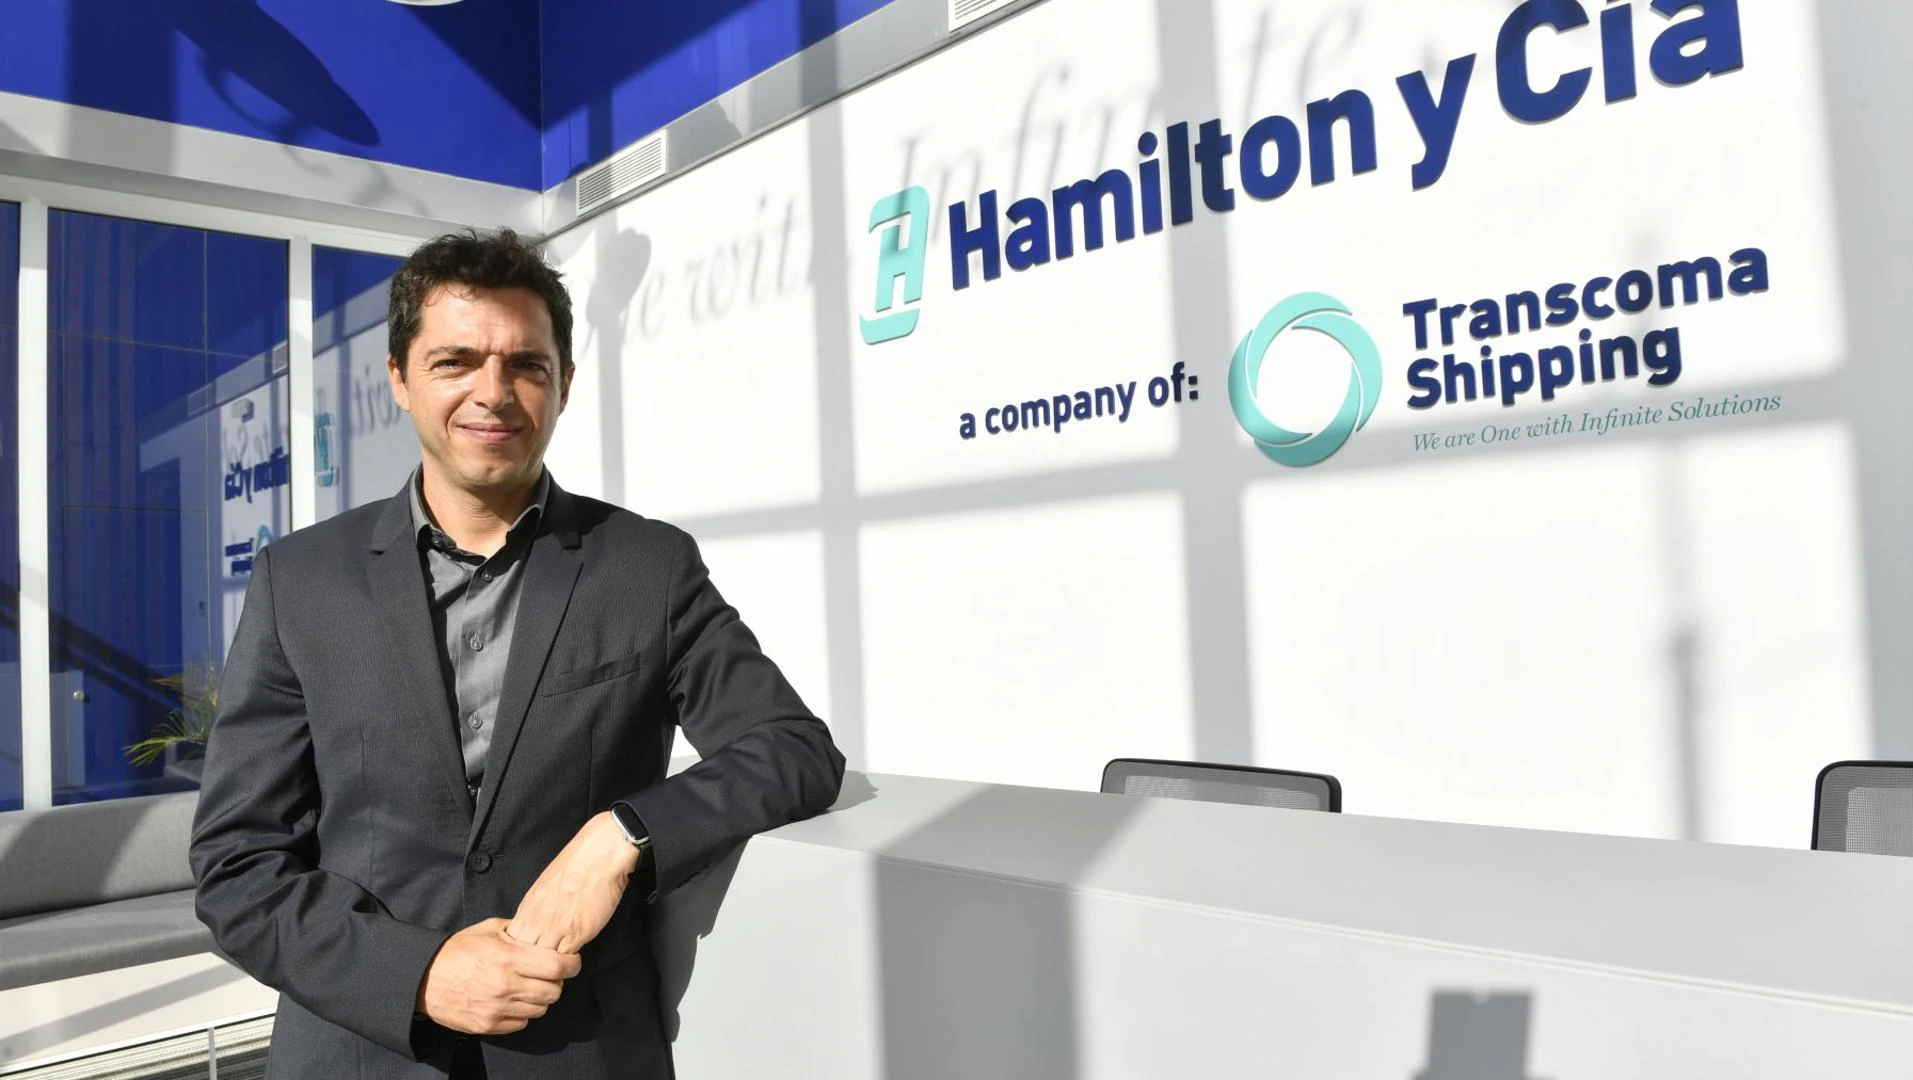 The Canarian company Hamilton extends its networks to the peninsula and begins operations in 4 ports